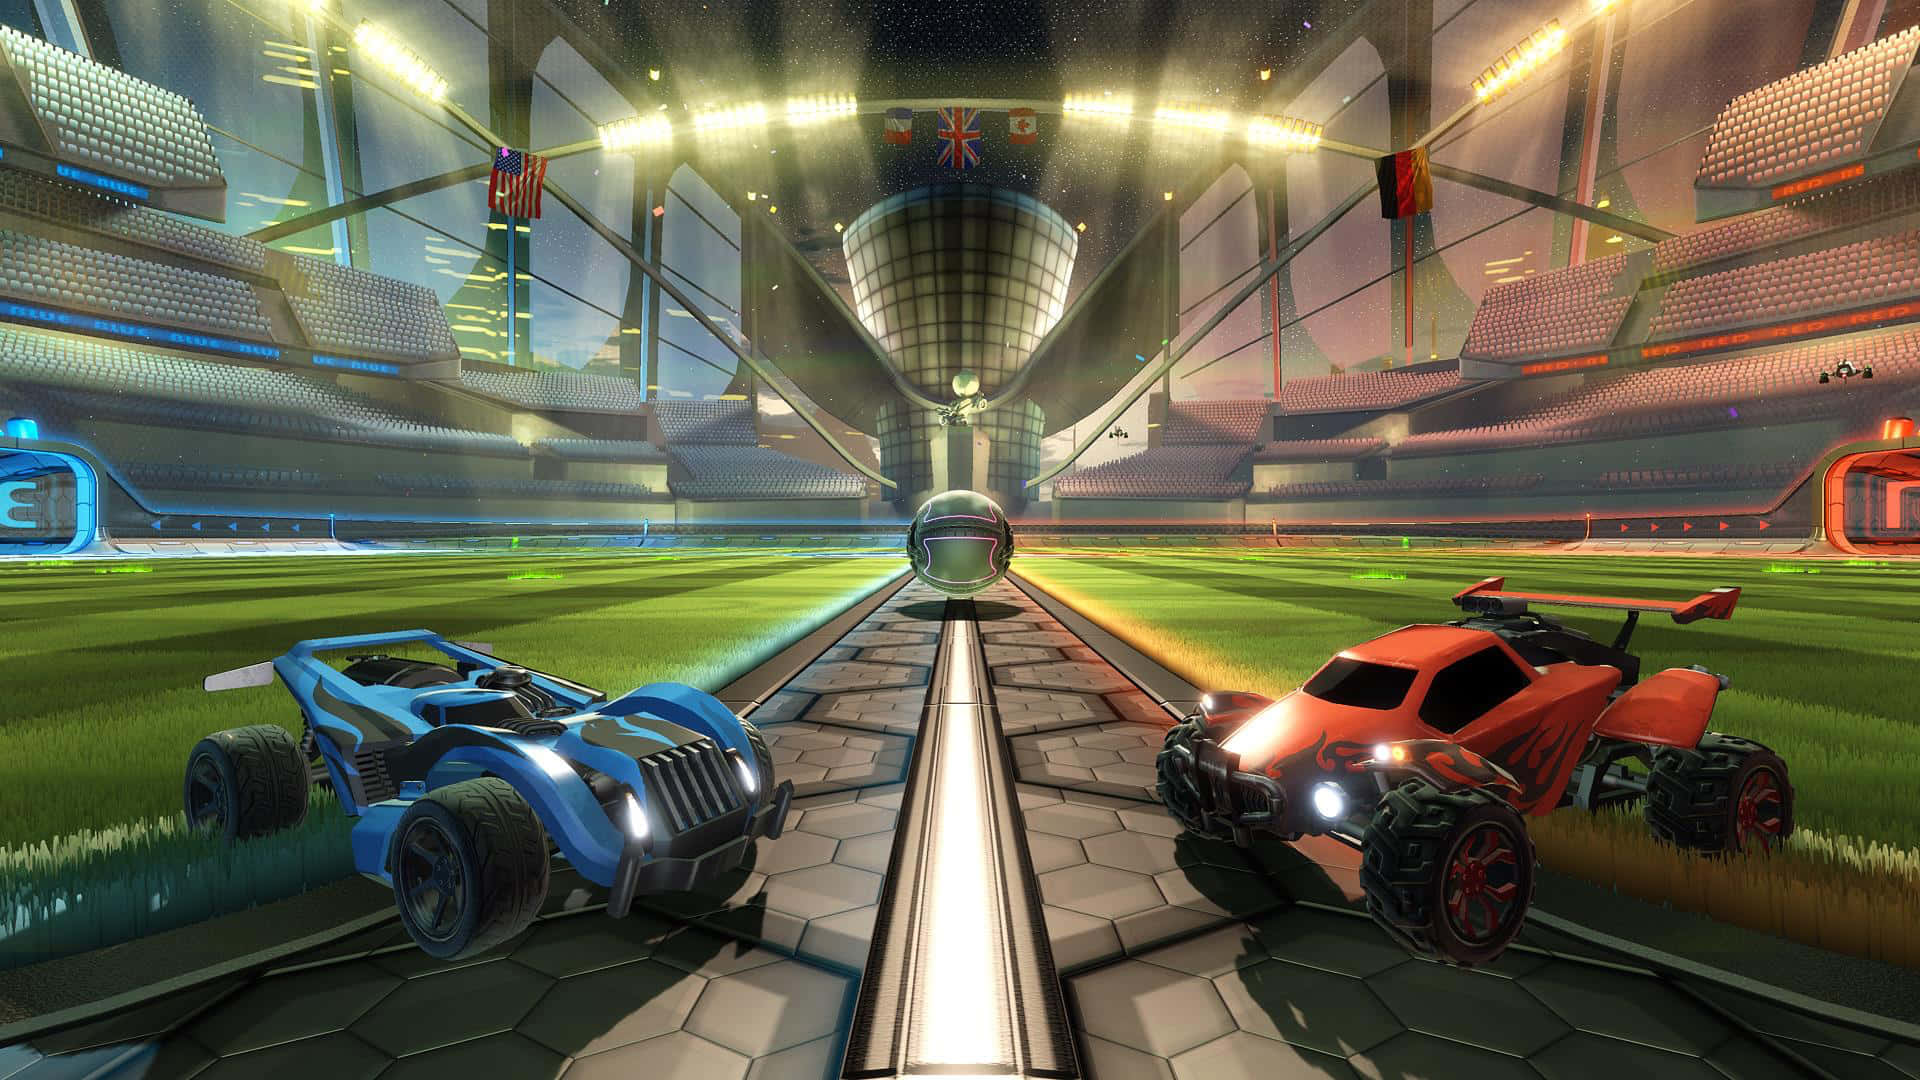 Race in Style with Rocket League